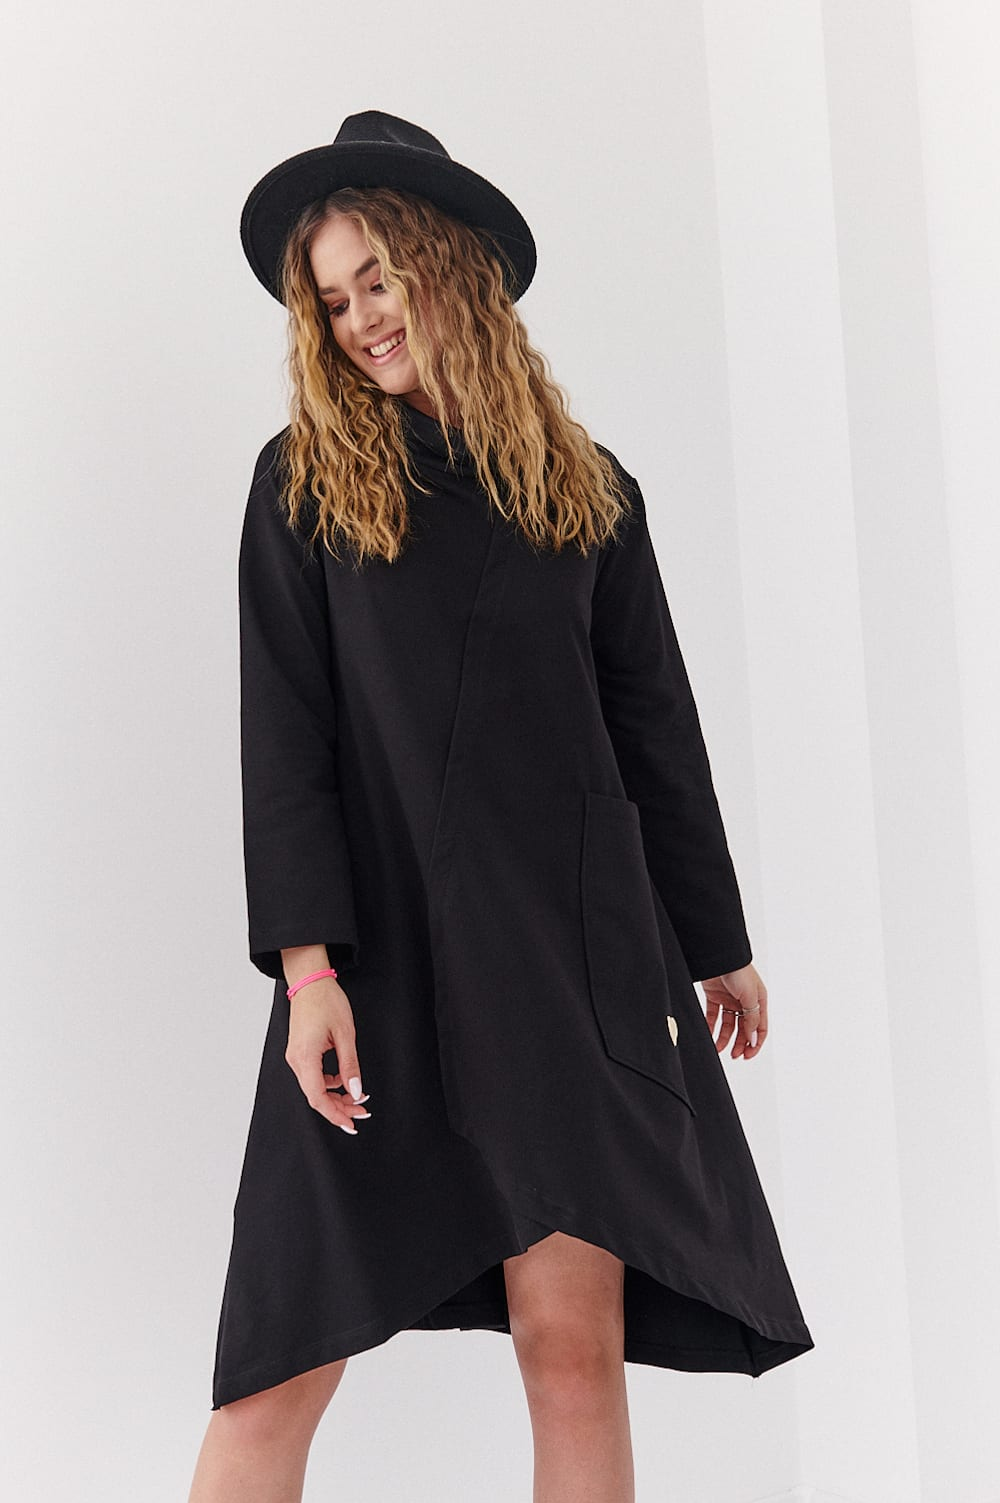 Trapezoidal dress with a wide turtleneck black